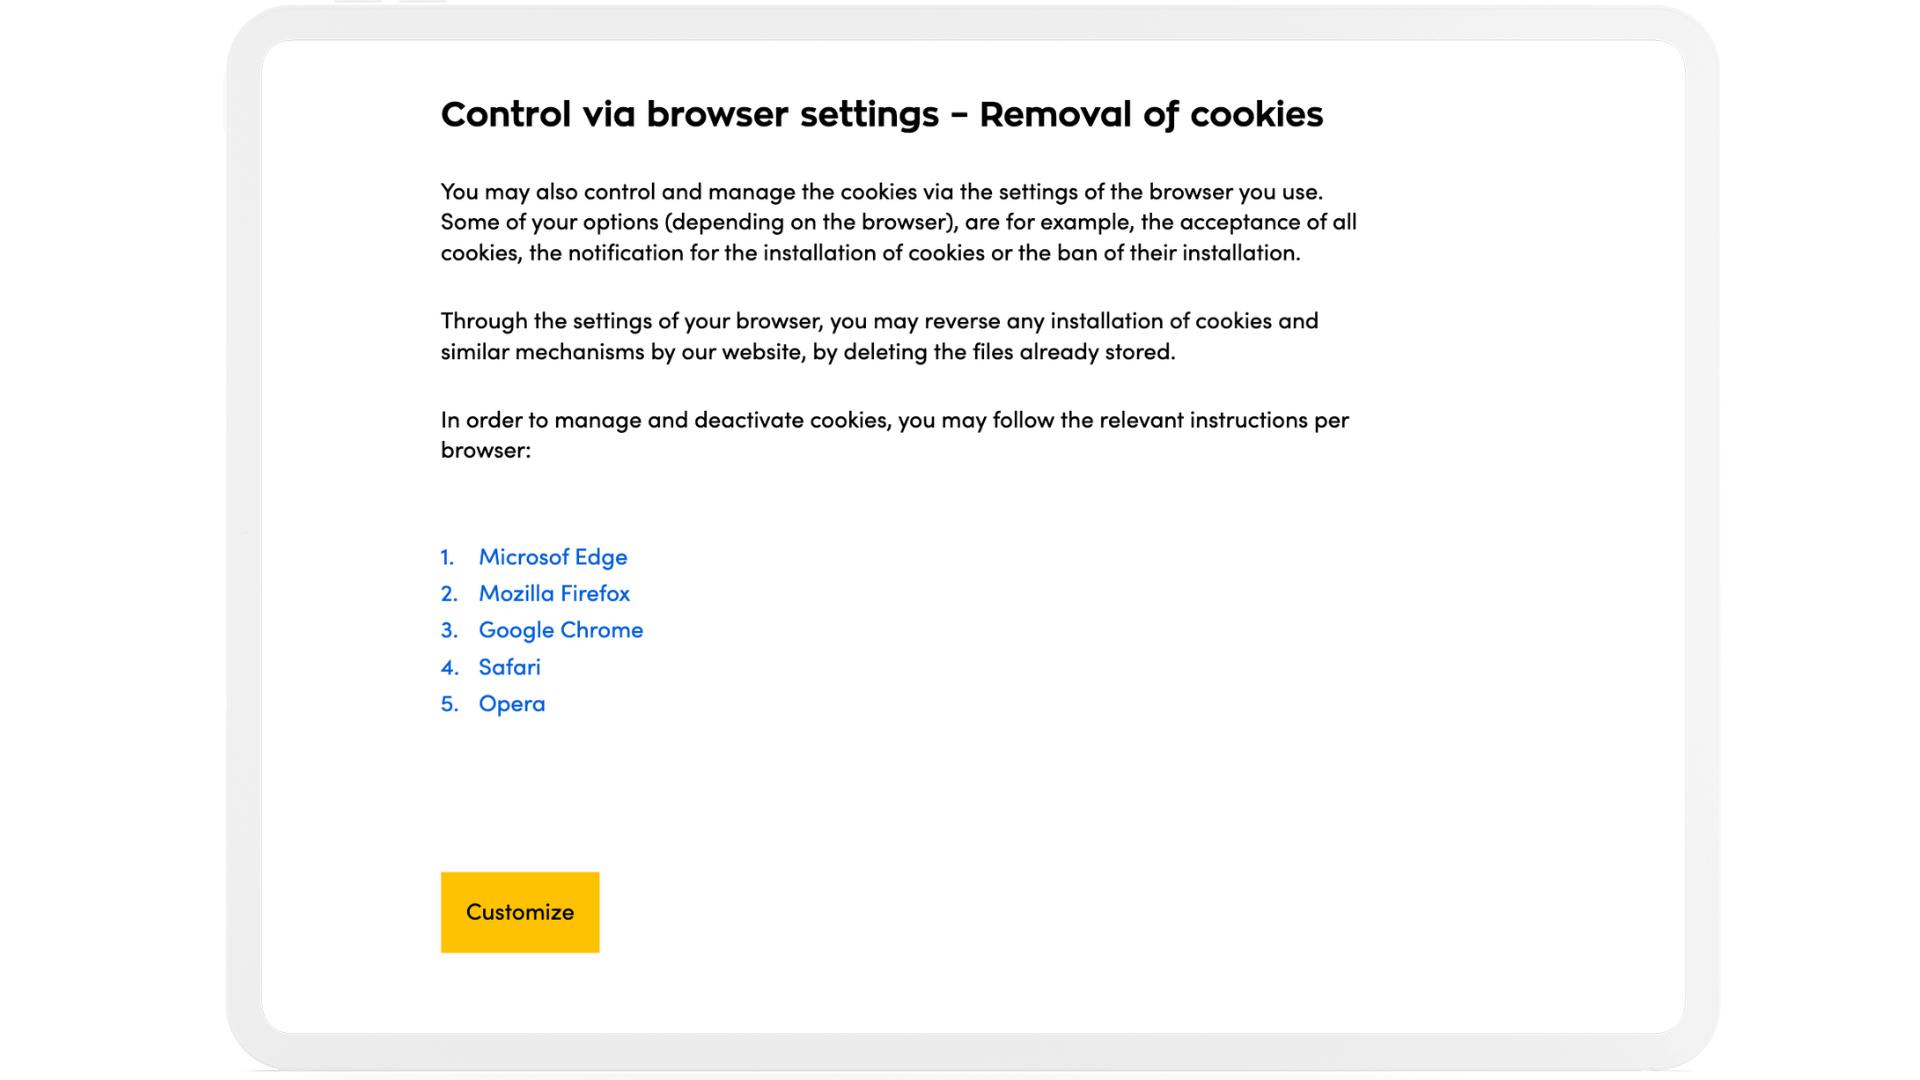 Control via browser settings - removal of cookies